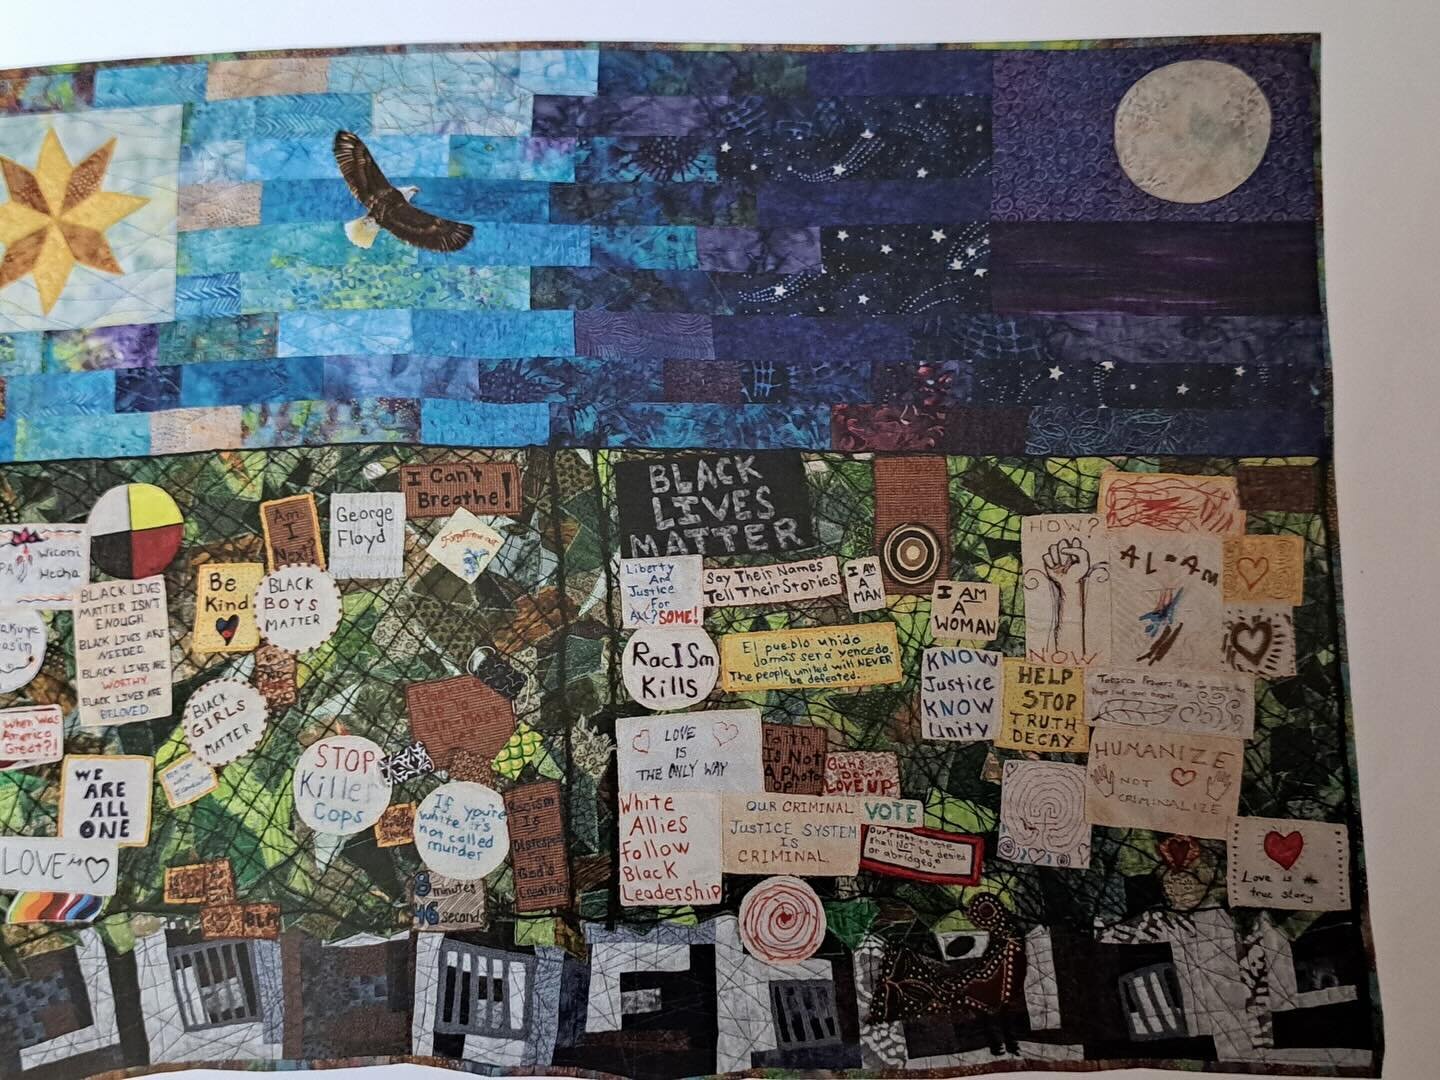 We are excited that pilgrim Mimi Goodwin will be bringing Studio To Go art activities to stops along the way! Mimi is a textile artist-activist and member of @ceasefirechoirtwincities She brings writing, drawing and sewing Justice Story Quilts into j